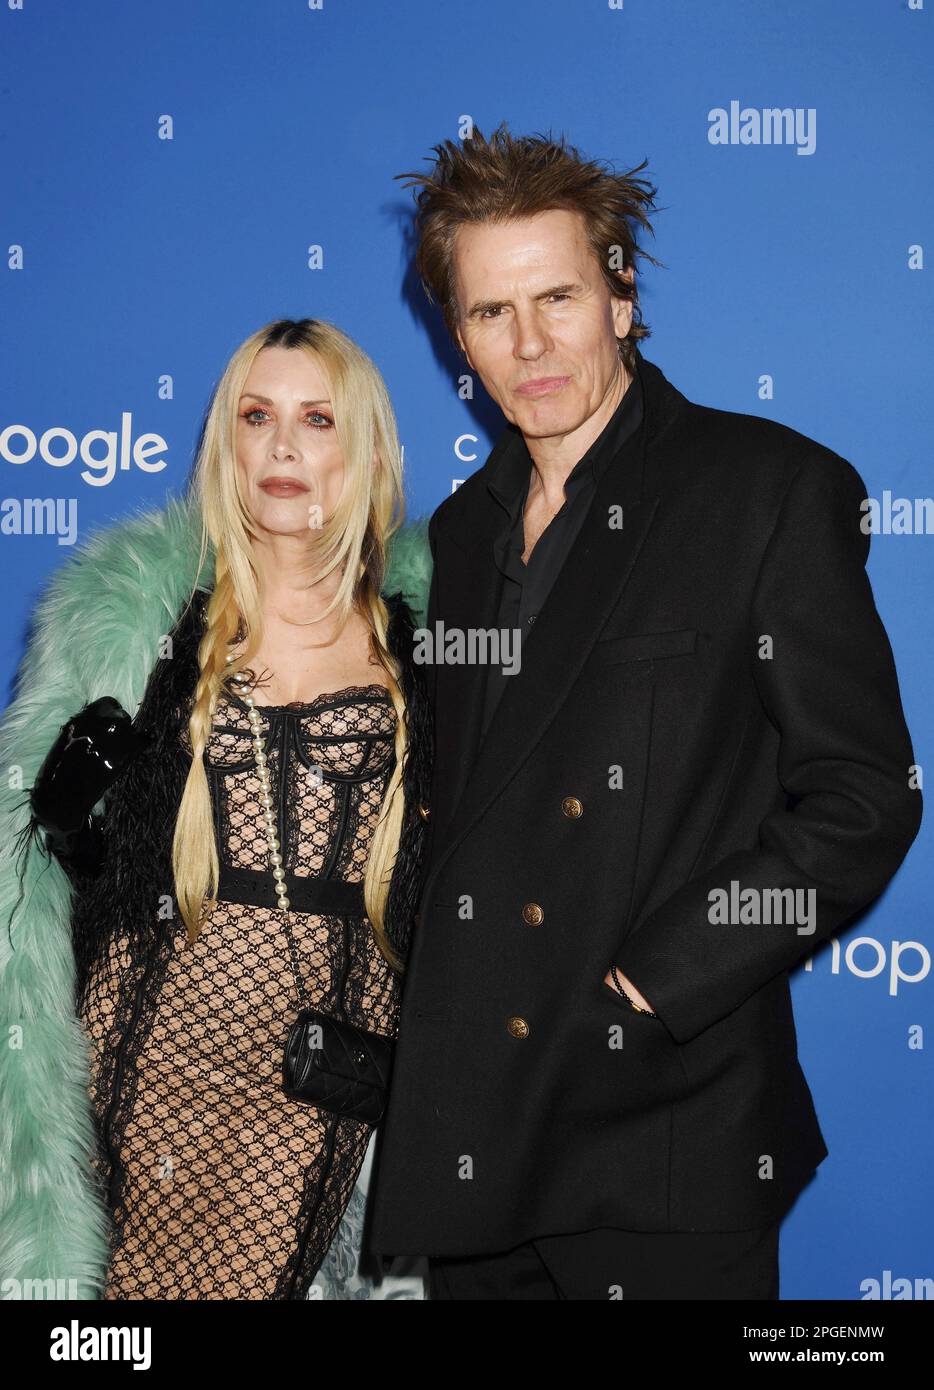 Los Angeles, California, USA. 21st Mar, 2023. (L-R) Gela Nash-Taylor and John Taylor attend the Fashion Trust US Awards at Goya Studios on March 21, 2023 in Los Angeles, California. Credit: Jeffrey Mayer/Jtm Photos/Media Punch/Alamy Live News Stock Photo